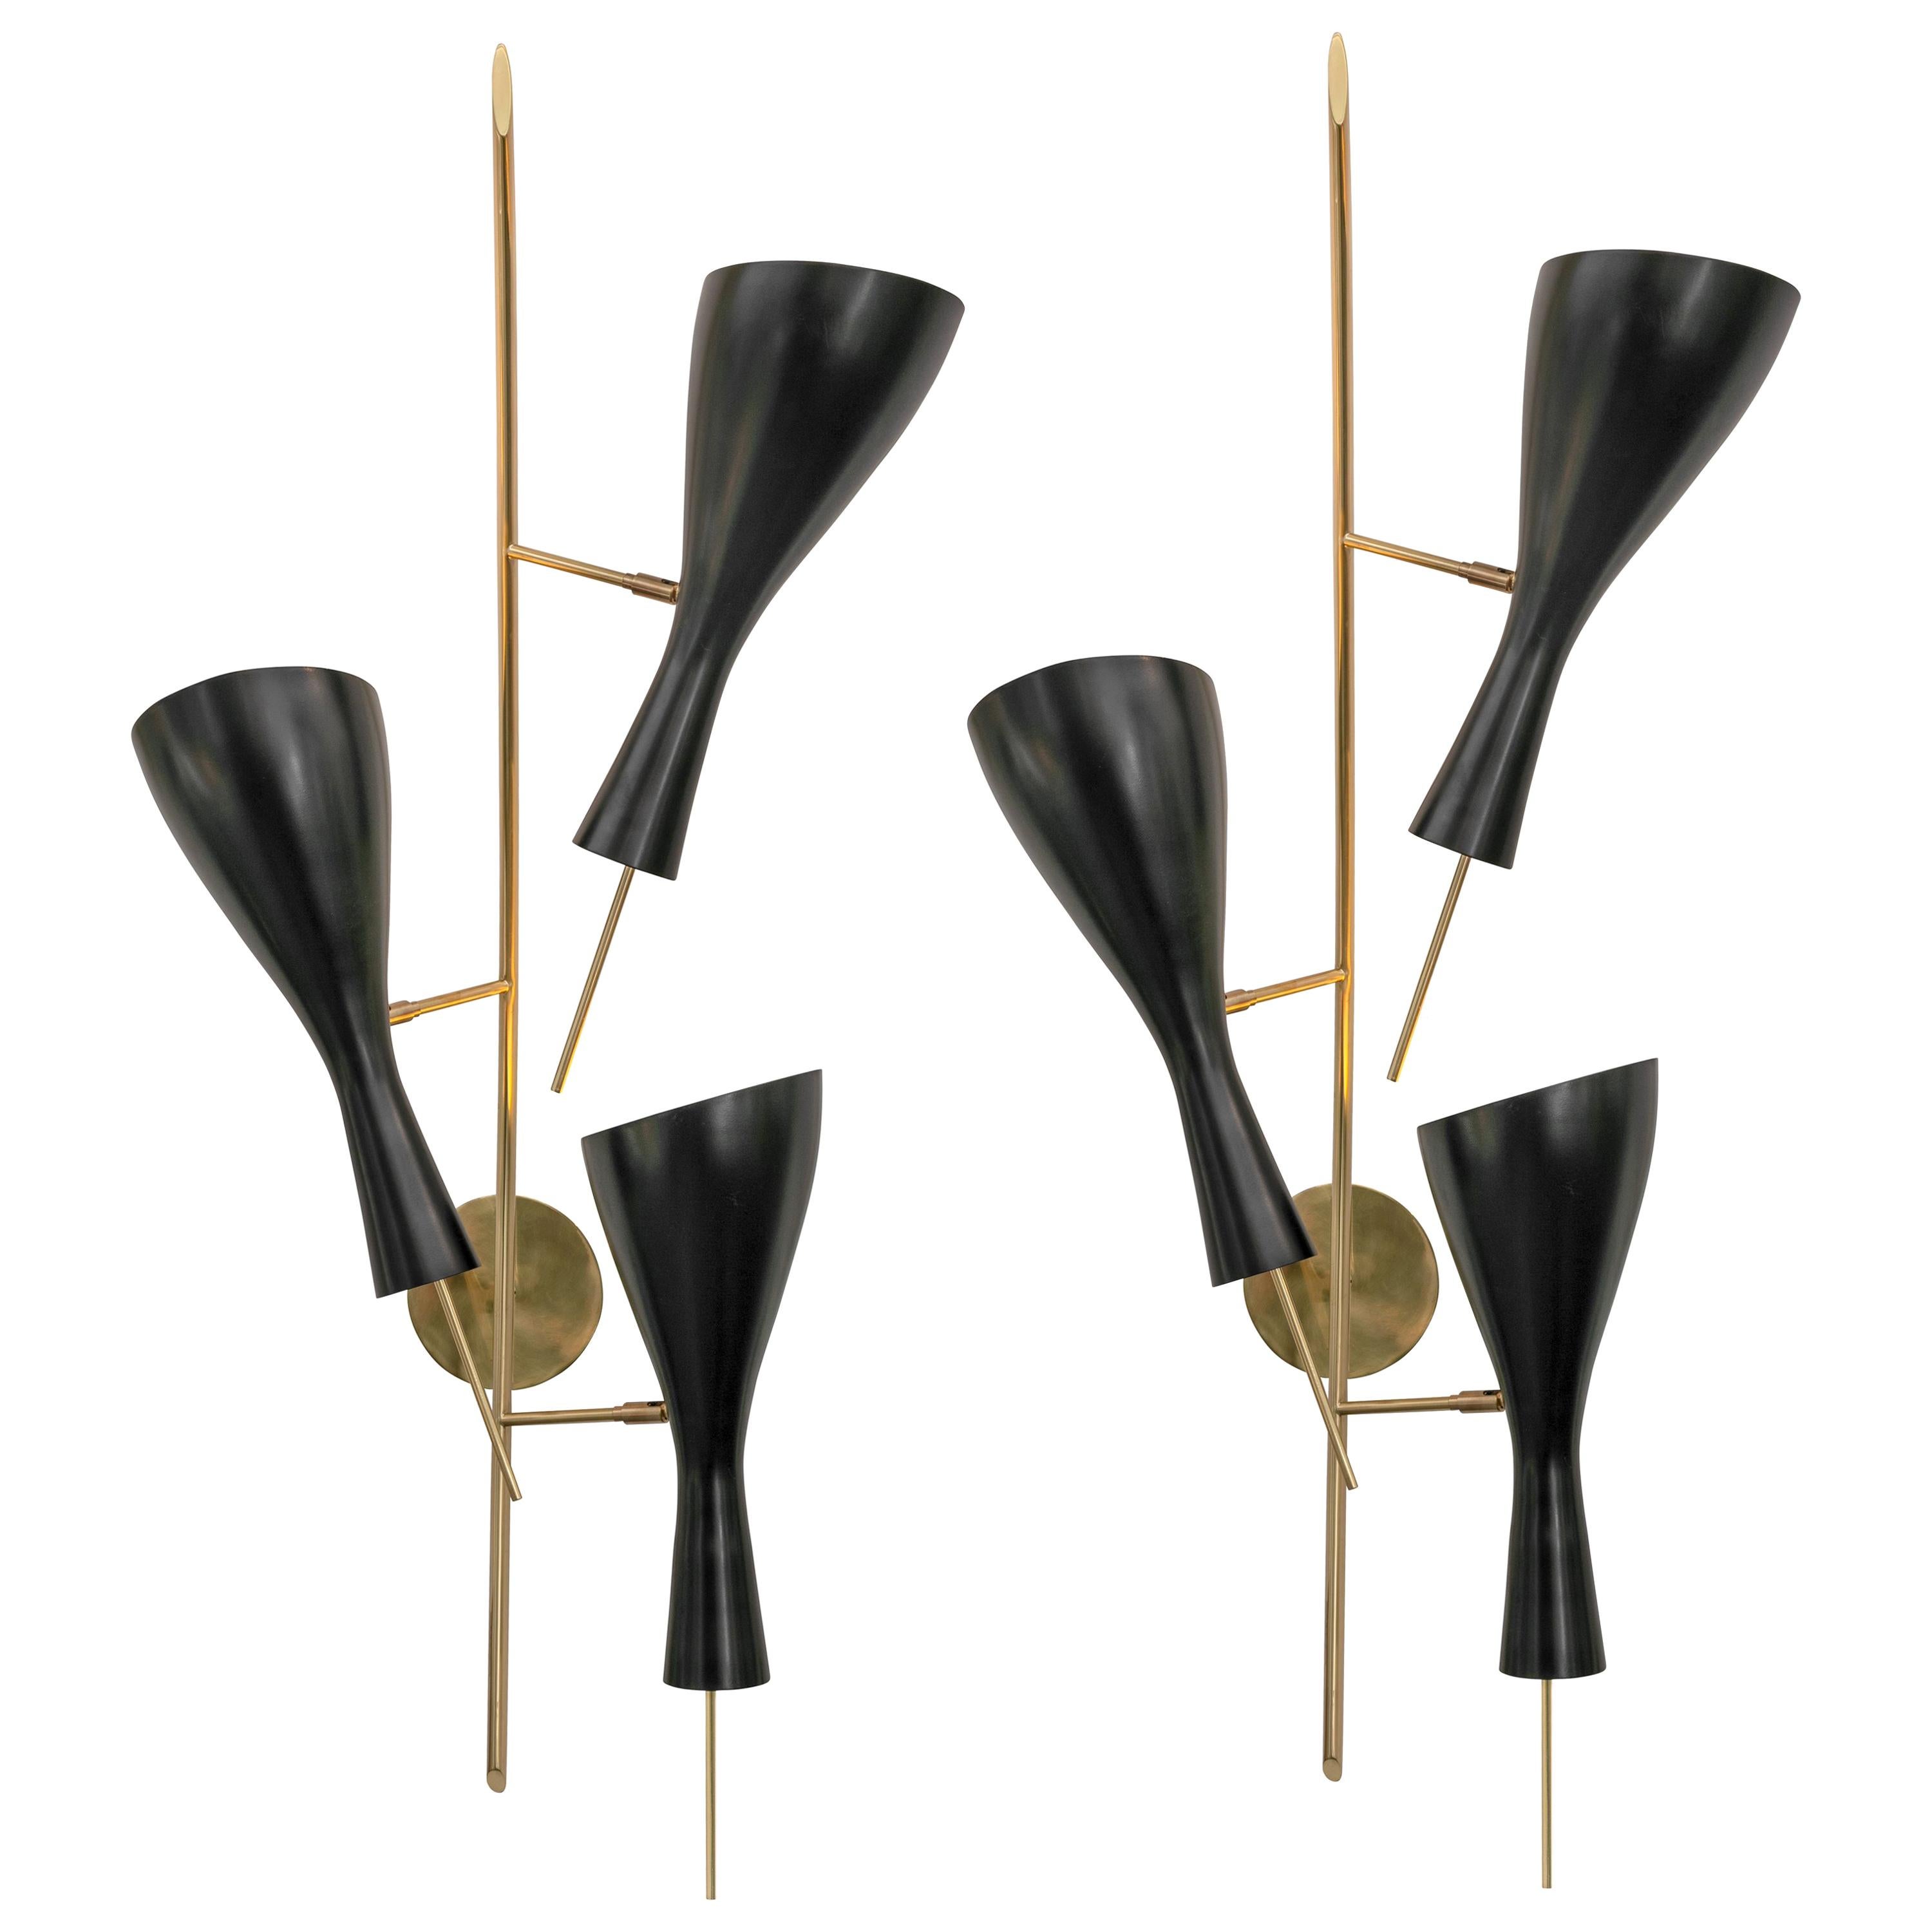 Italian Mid-Century Style Sconces with Black Metal Shades